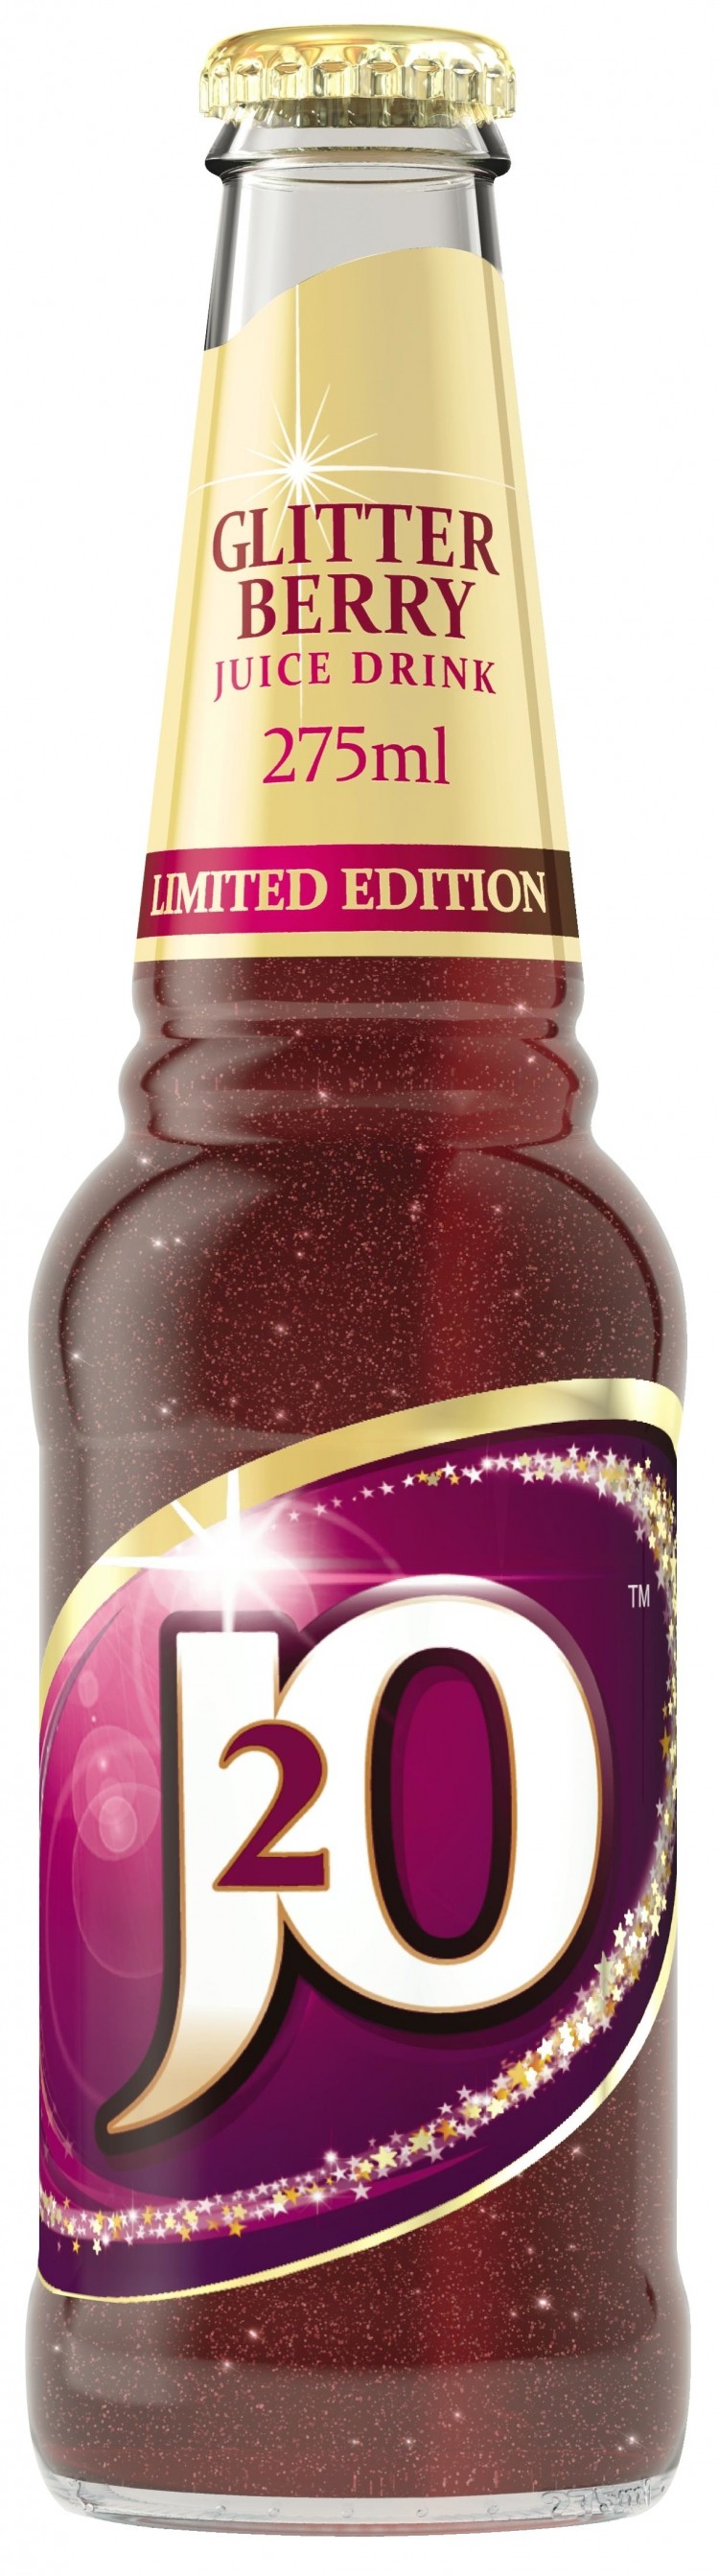 J2O Glitter Berry: a combination of red grape, cherry and a hint of spice with edible gold glitter